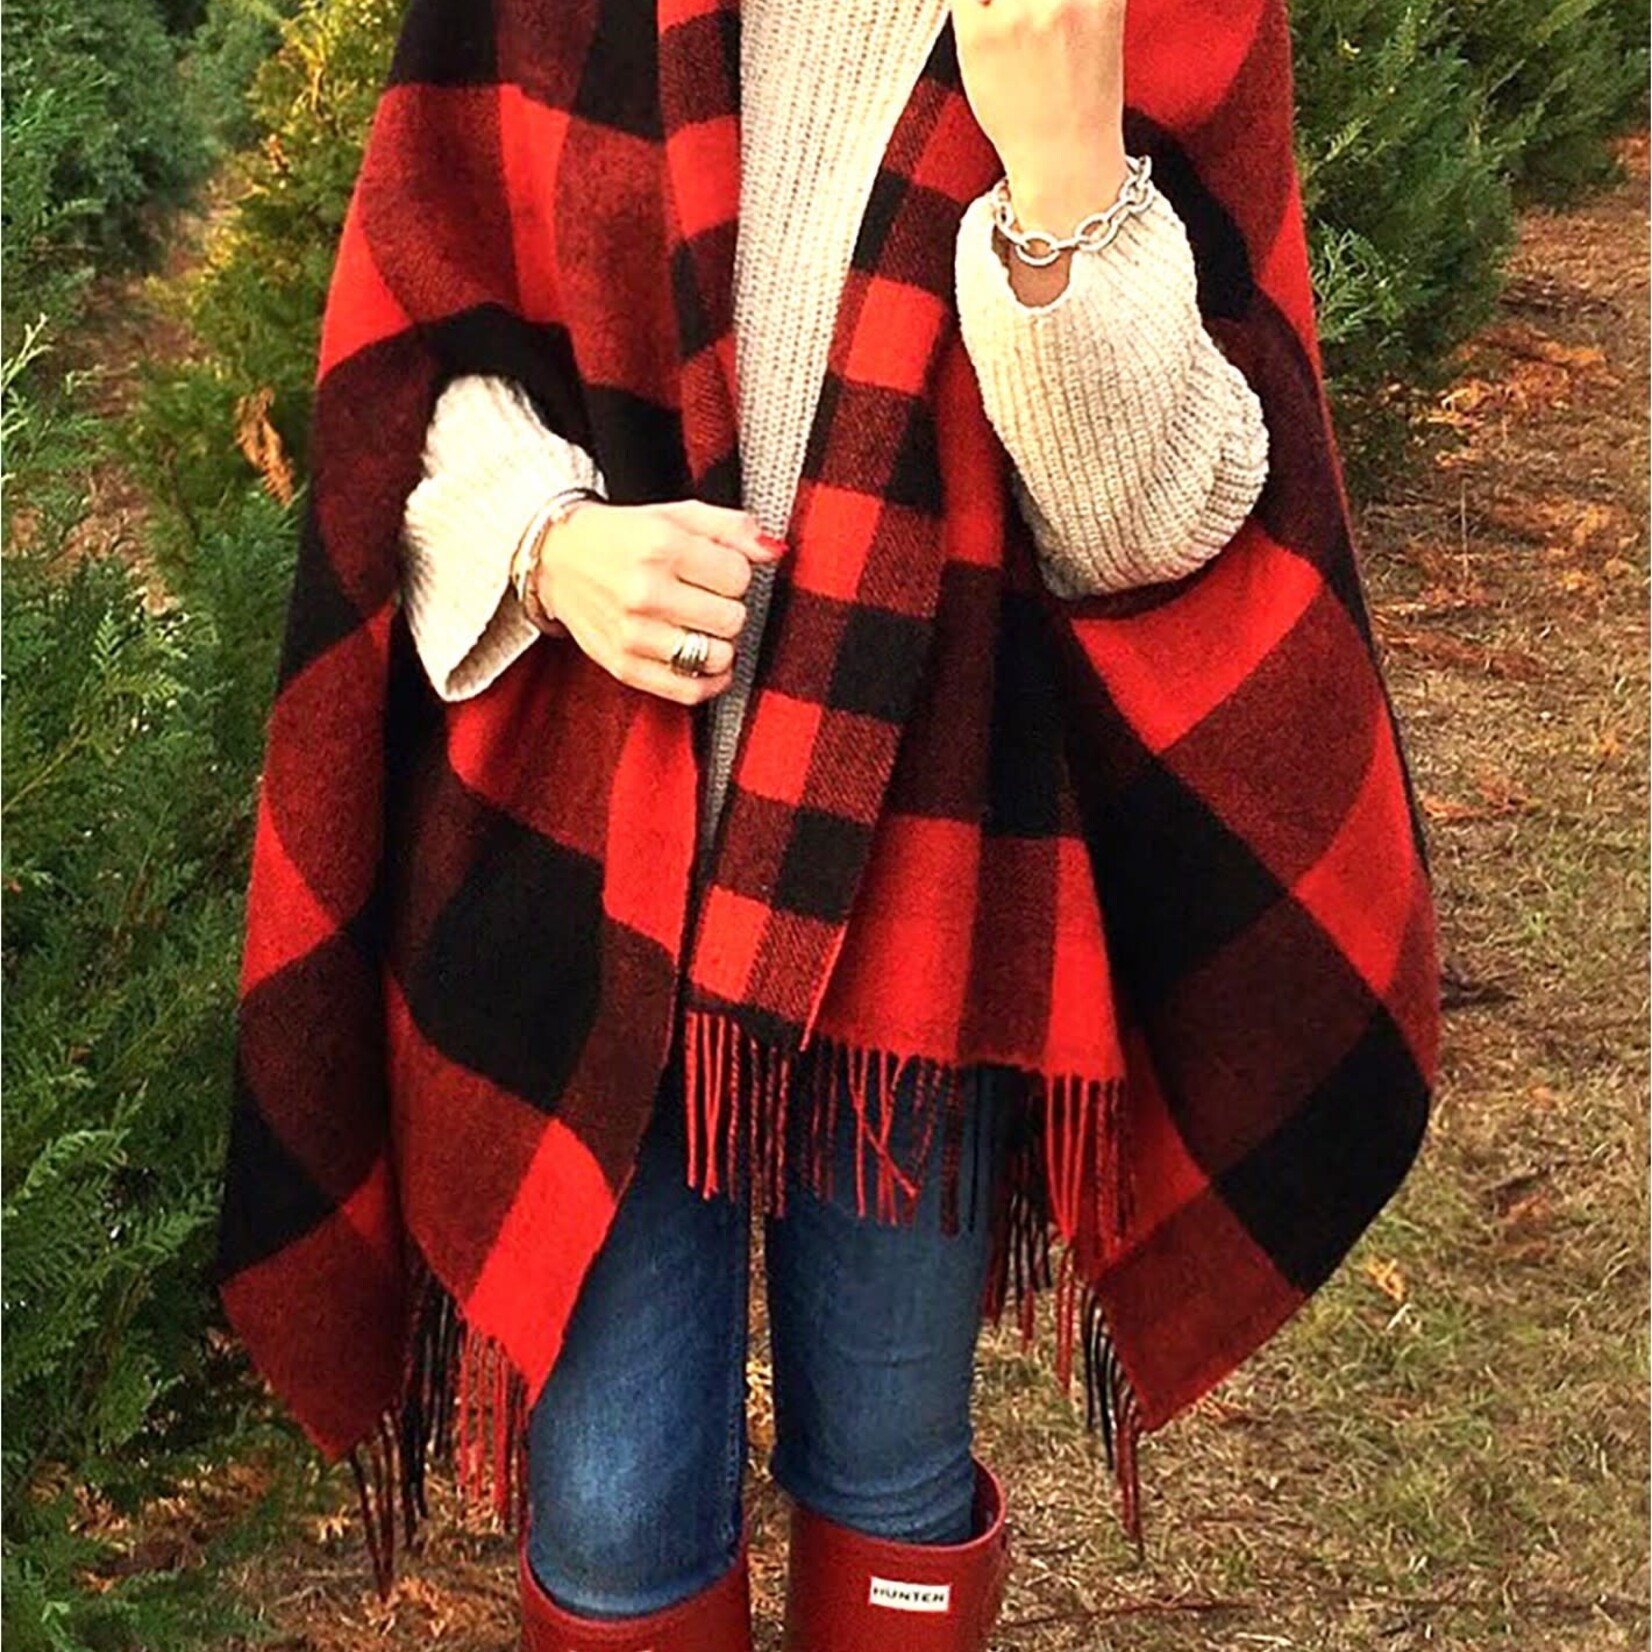 Black and Red Plaid Patterned Cape W/ Fringe. Red